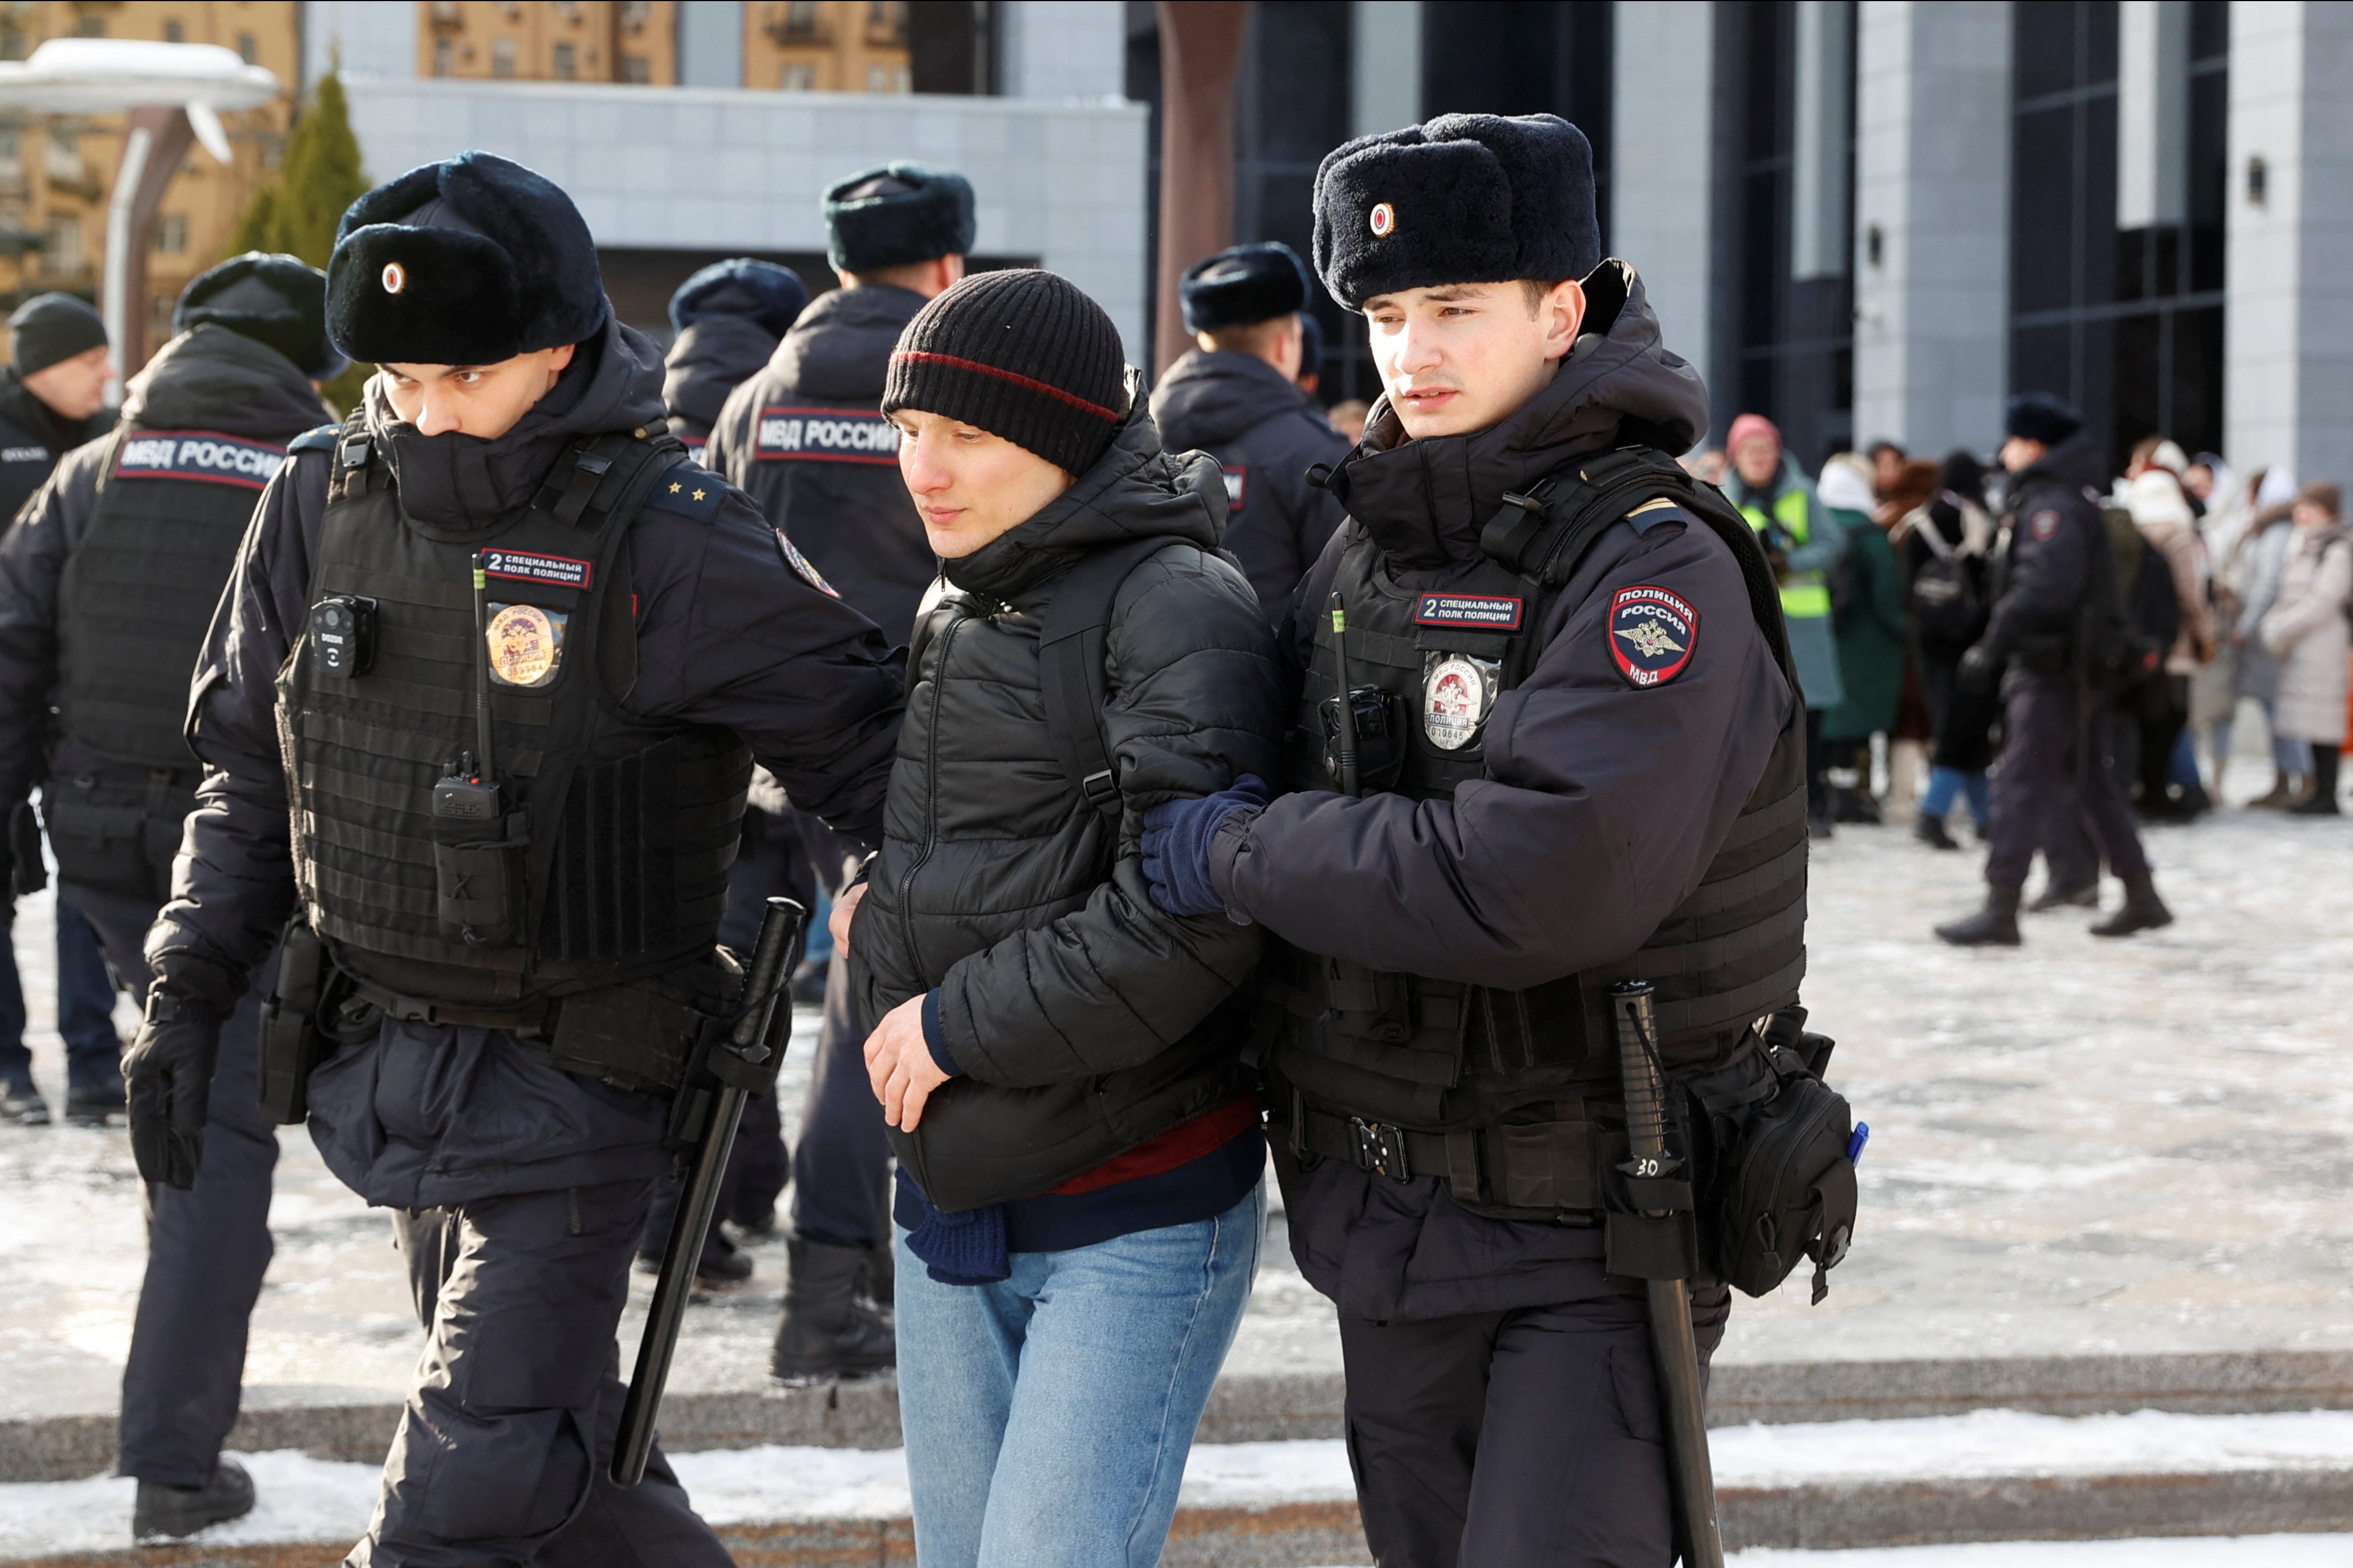 Police officers detain an individual as protests were held in Moscow on Saturday